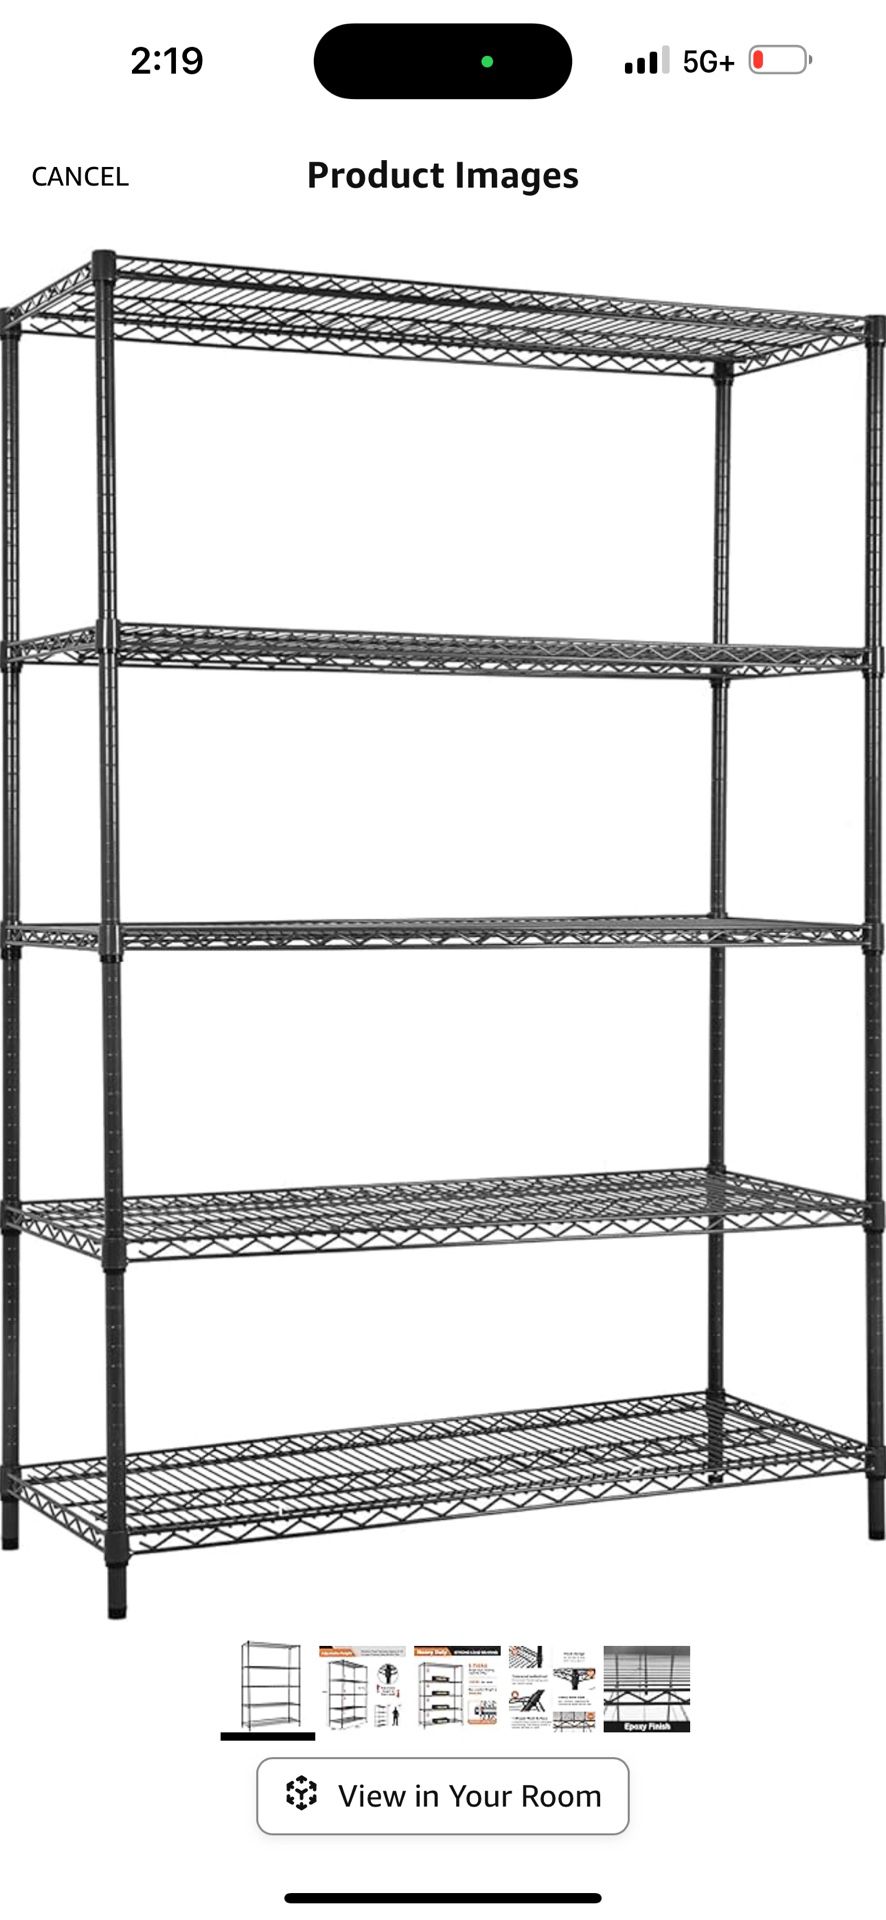 Land Guard 5 Tier Black Storage Racks and Shelving - 48" L x 20" W x 72" H Heavy Steel Material Pantry Shelves 